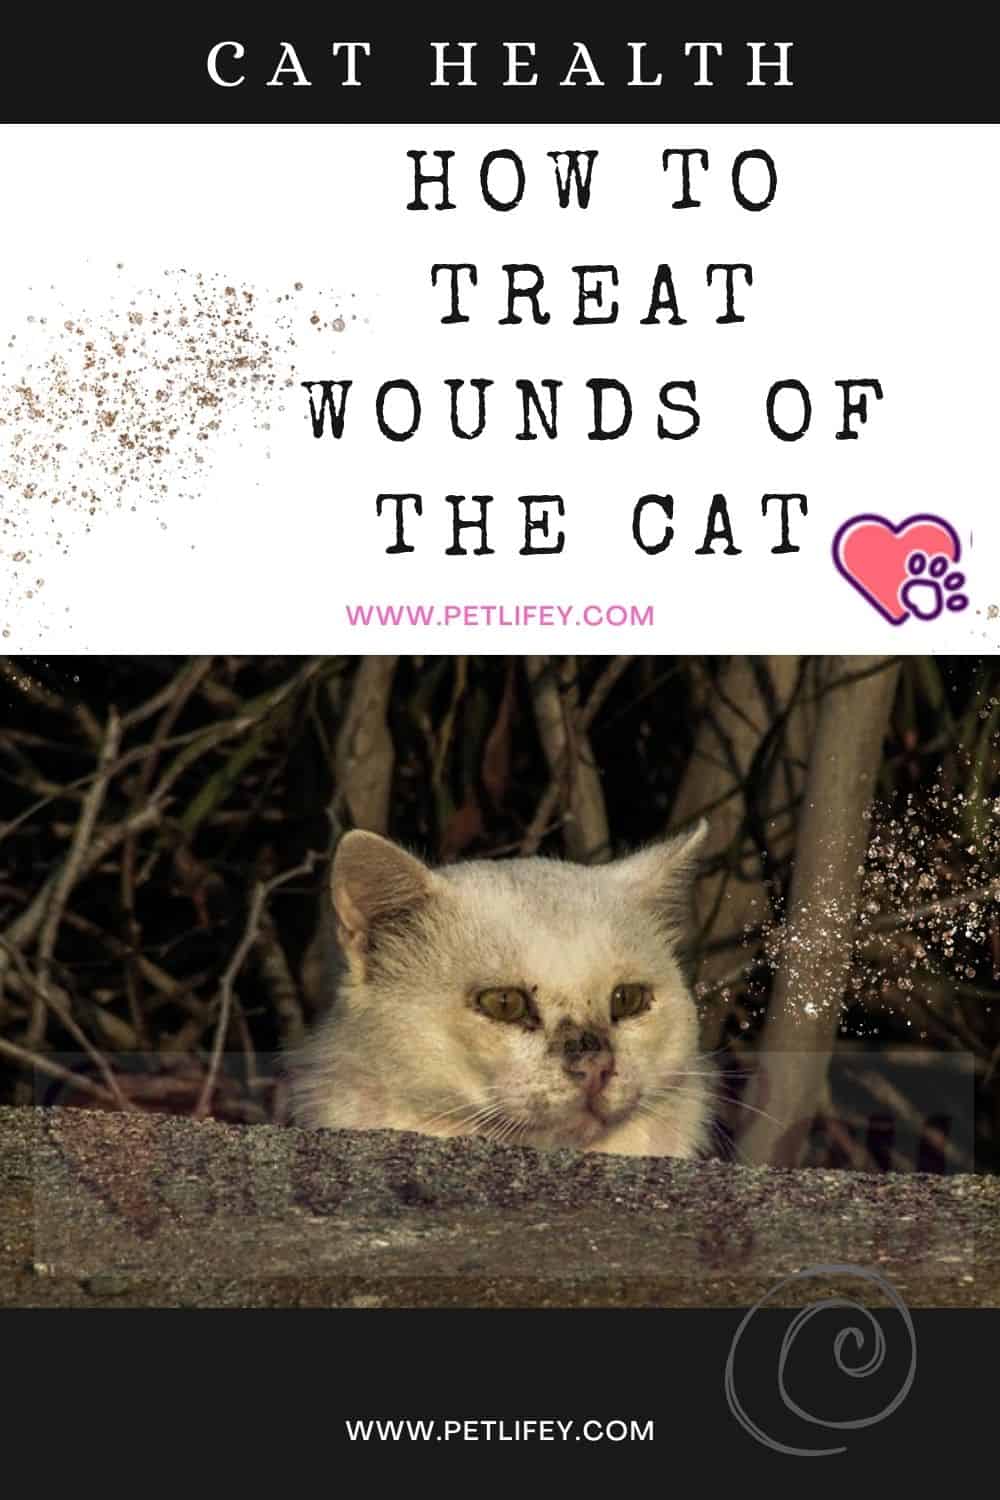 How to treat wounds of the Cat